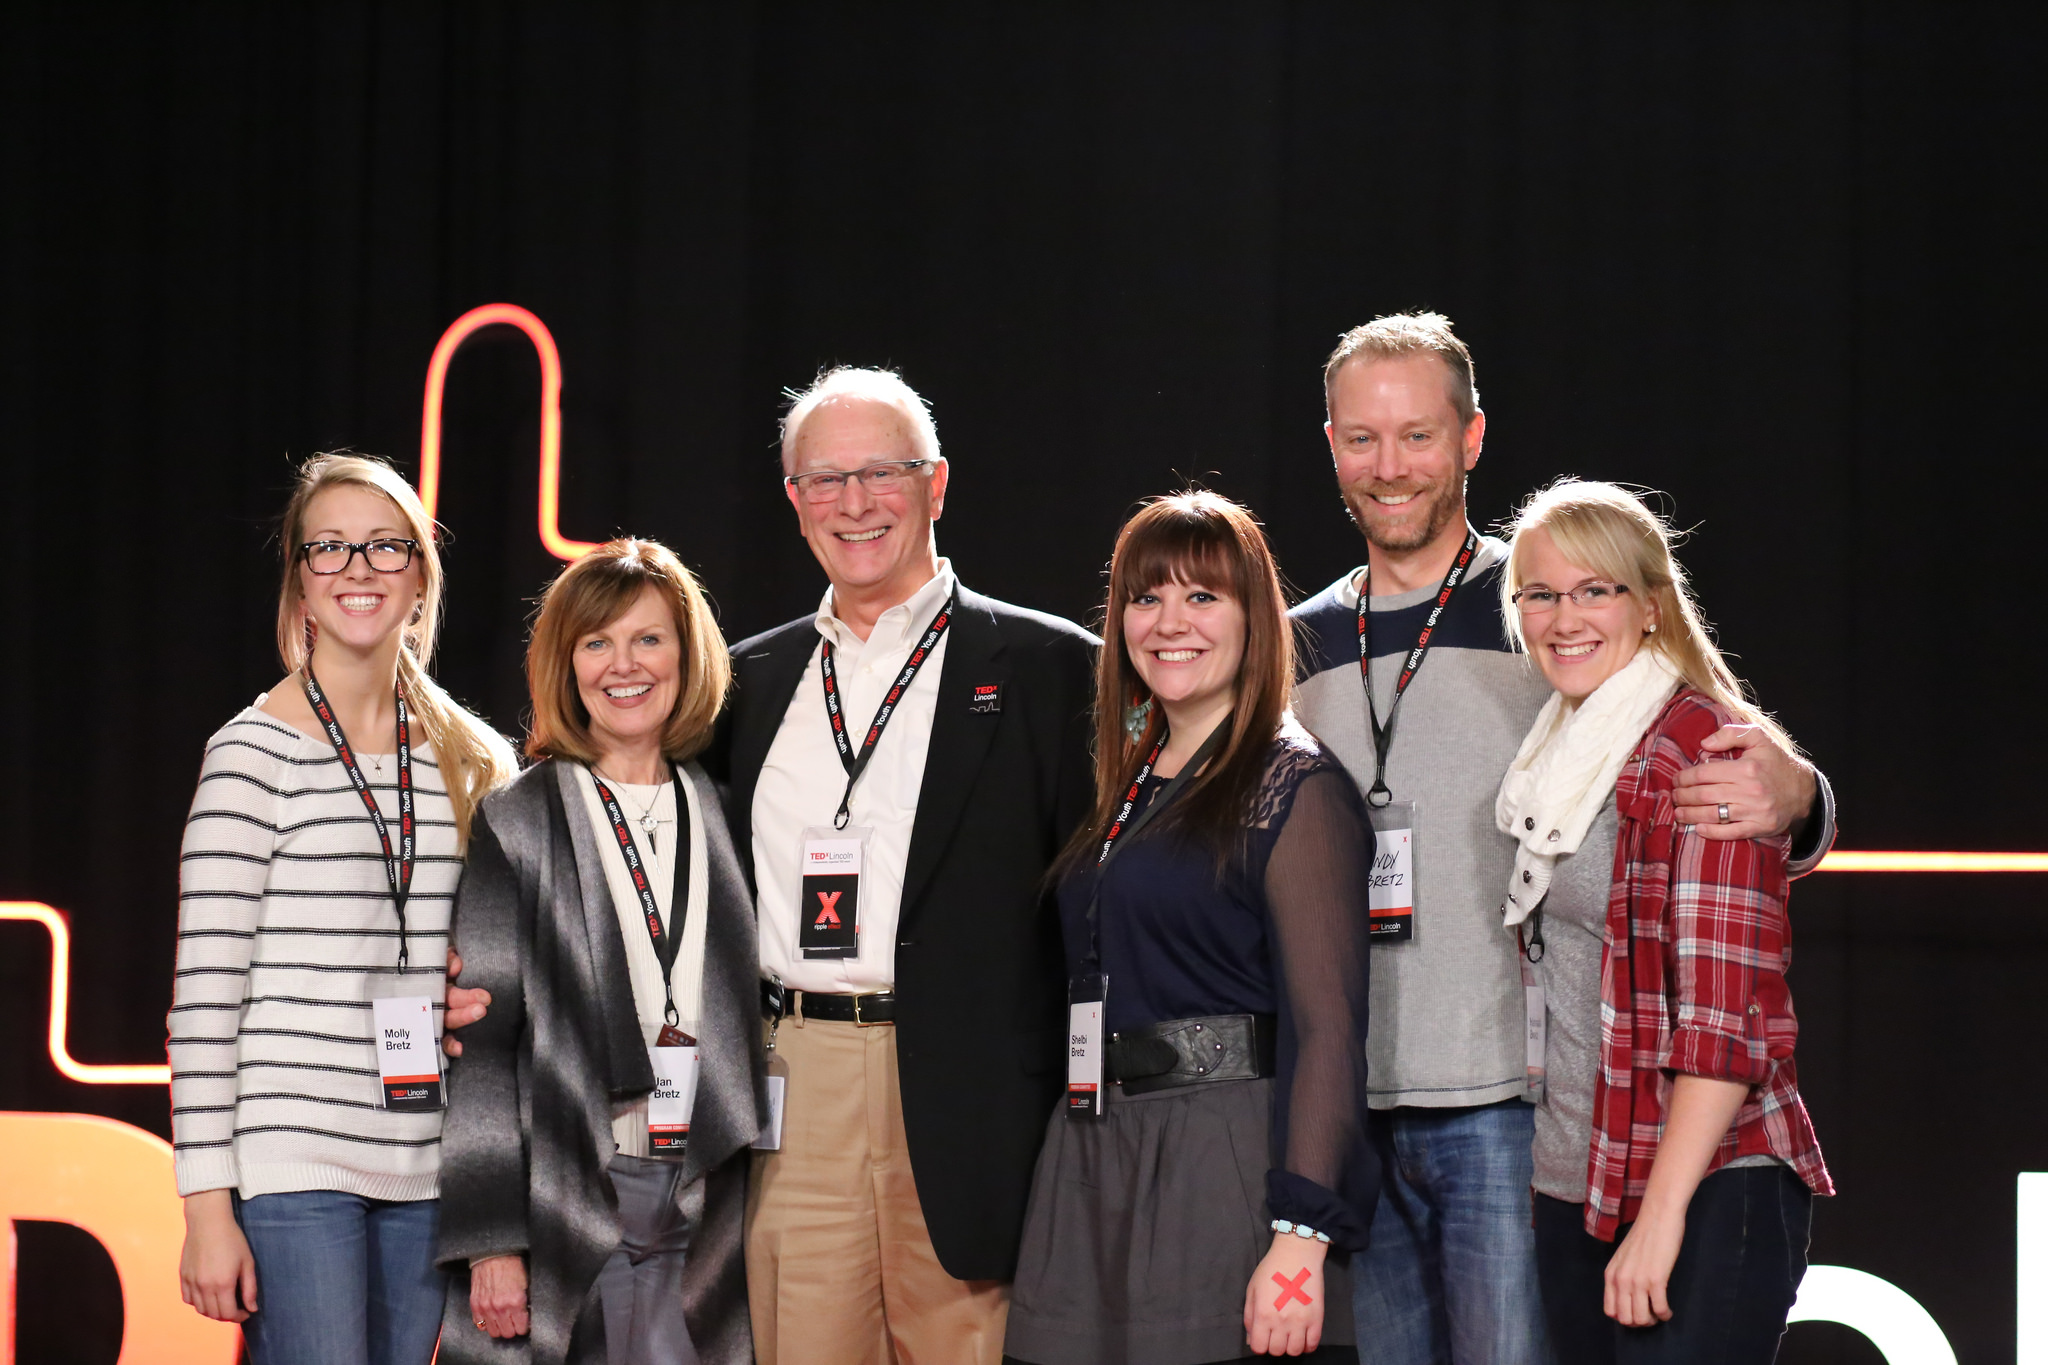 Retired TEDx organizers make meaningful connections — locally and
around the world